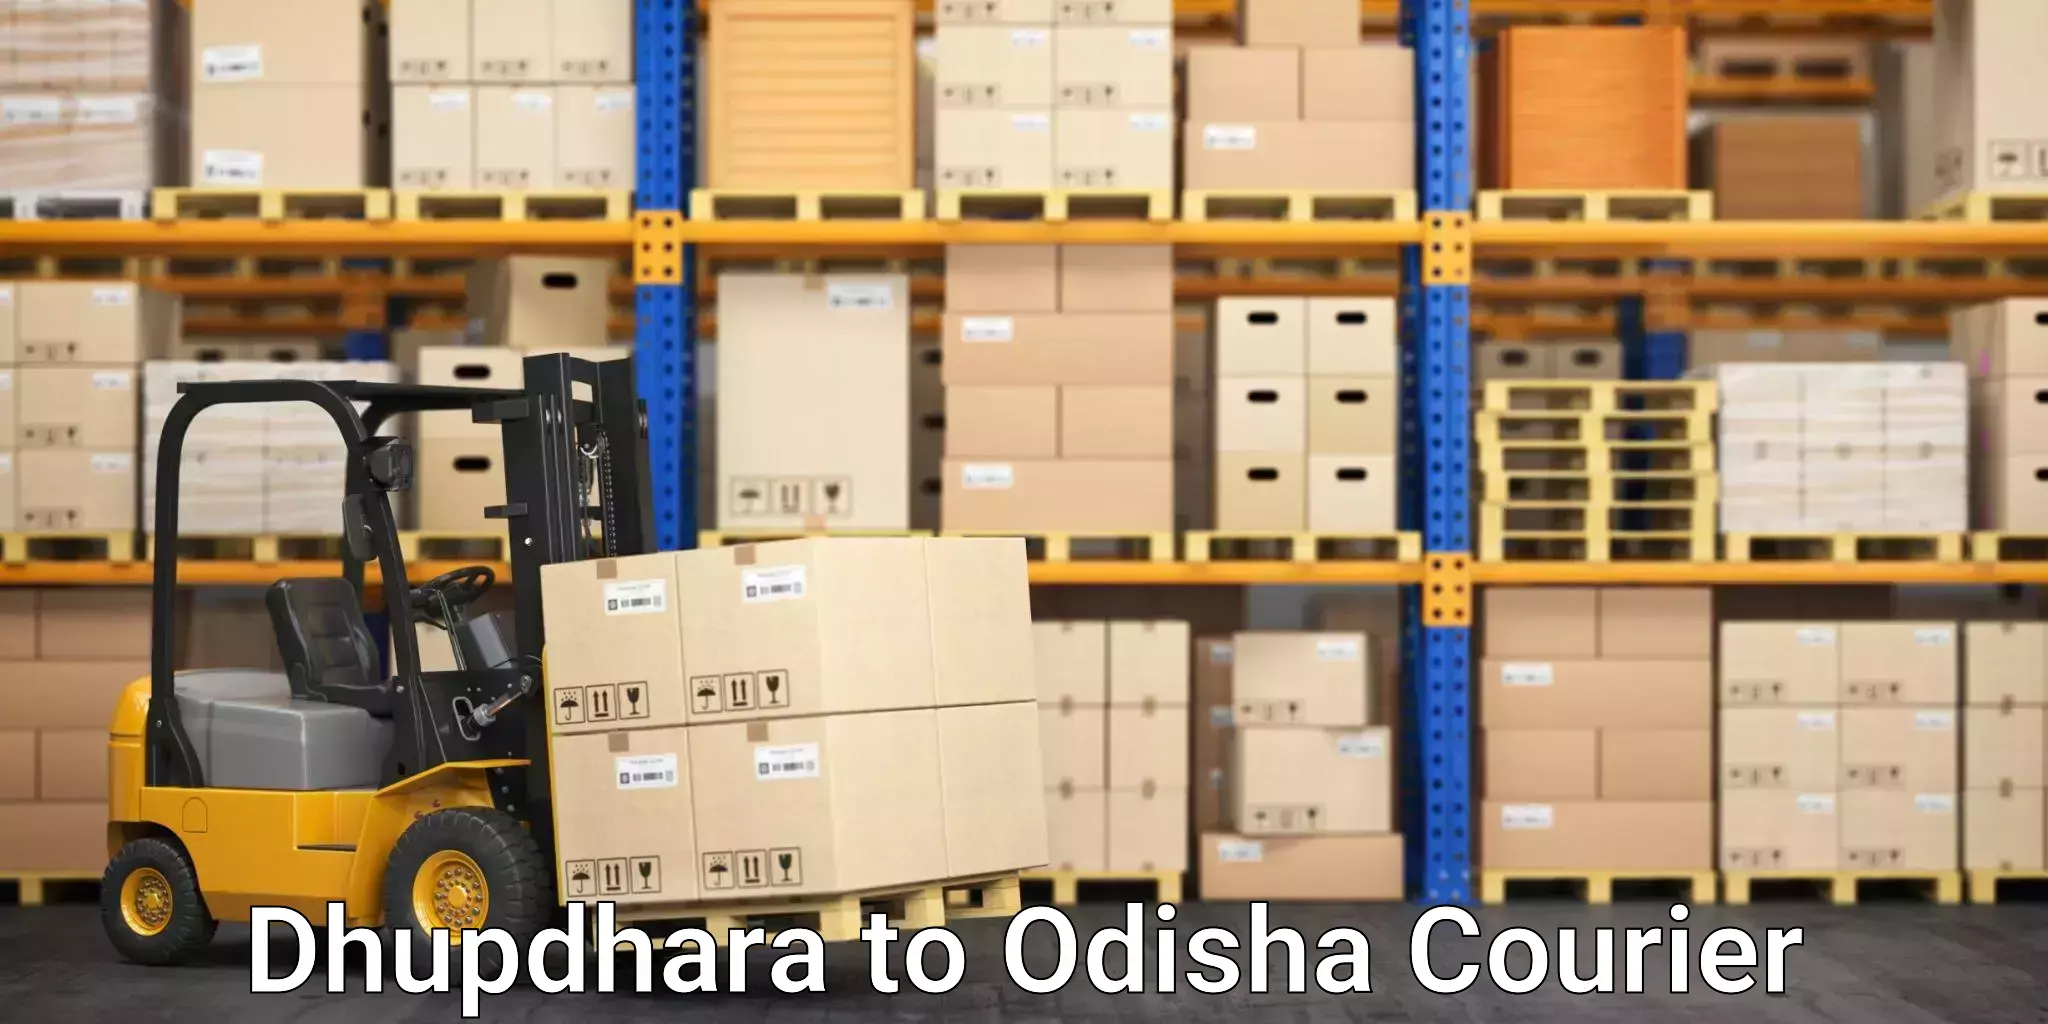 Cash on delivery service Dhupdhara to Odisha